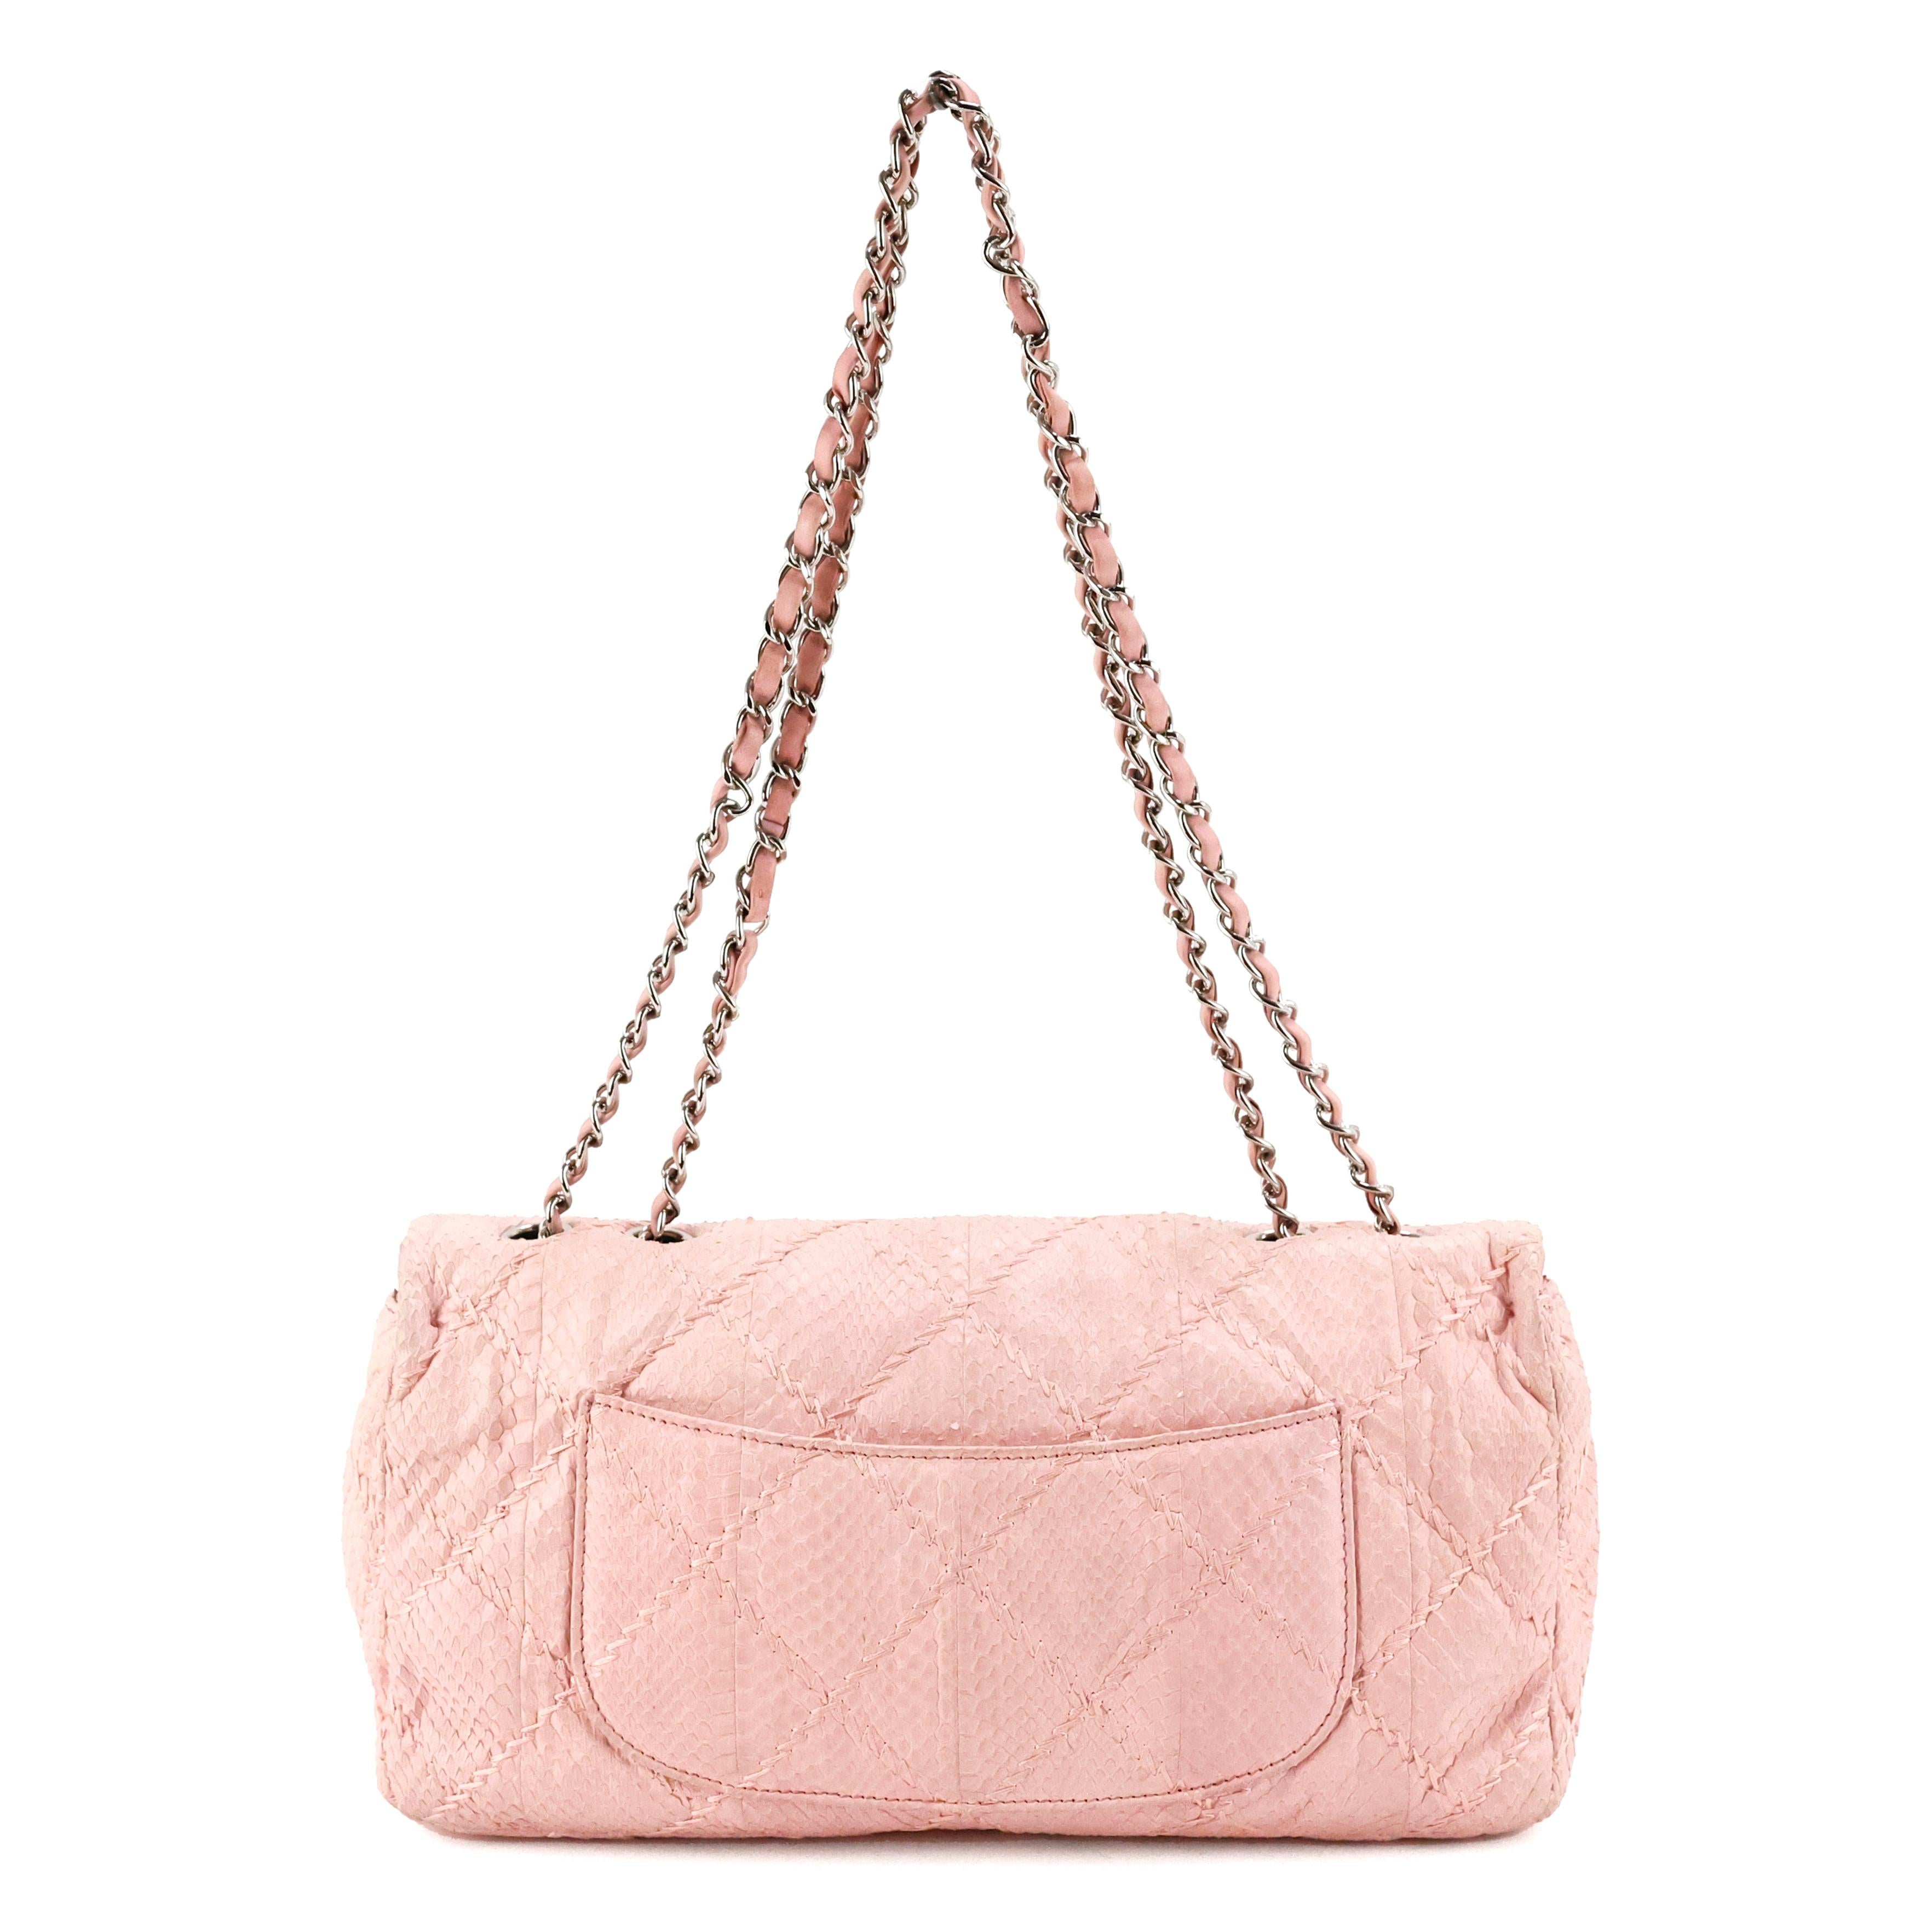 Chanel timeless bag in light pink python leather, silver hardware.


Condition:
Really good, to note: color tone slightly faded (doesn't affects the final appearance).


Packing/accessories:
Dustbag.


Measurements:
31cm x 16cm x 6cm